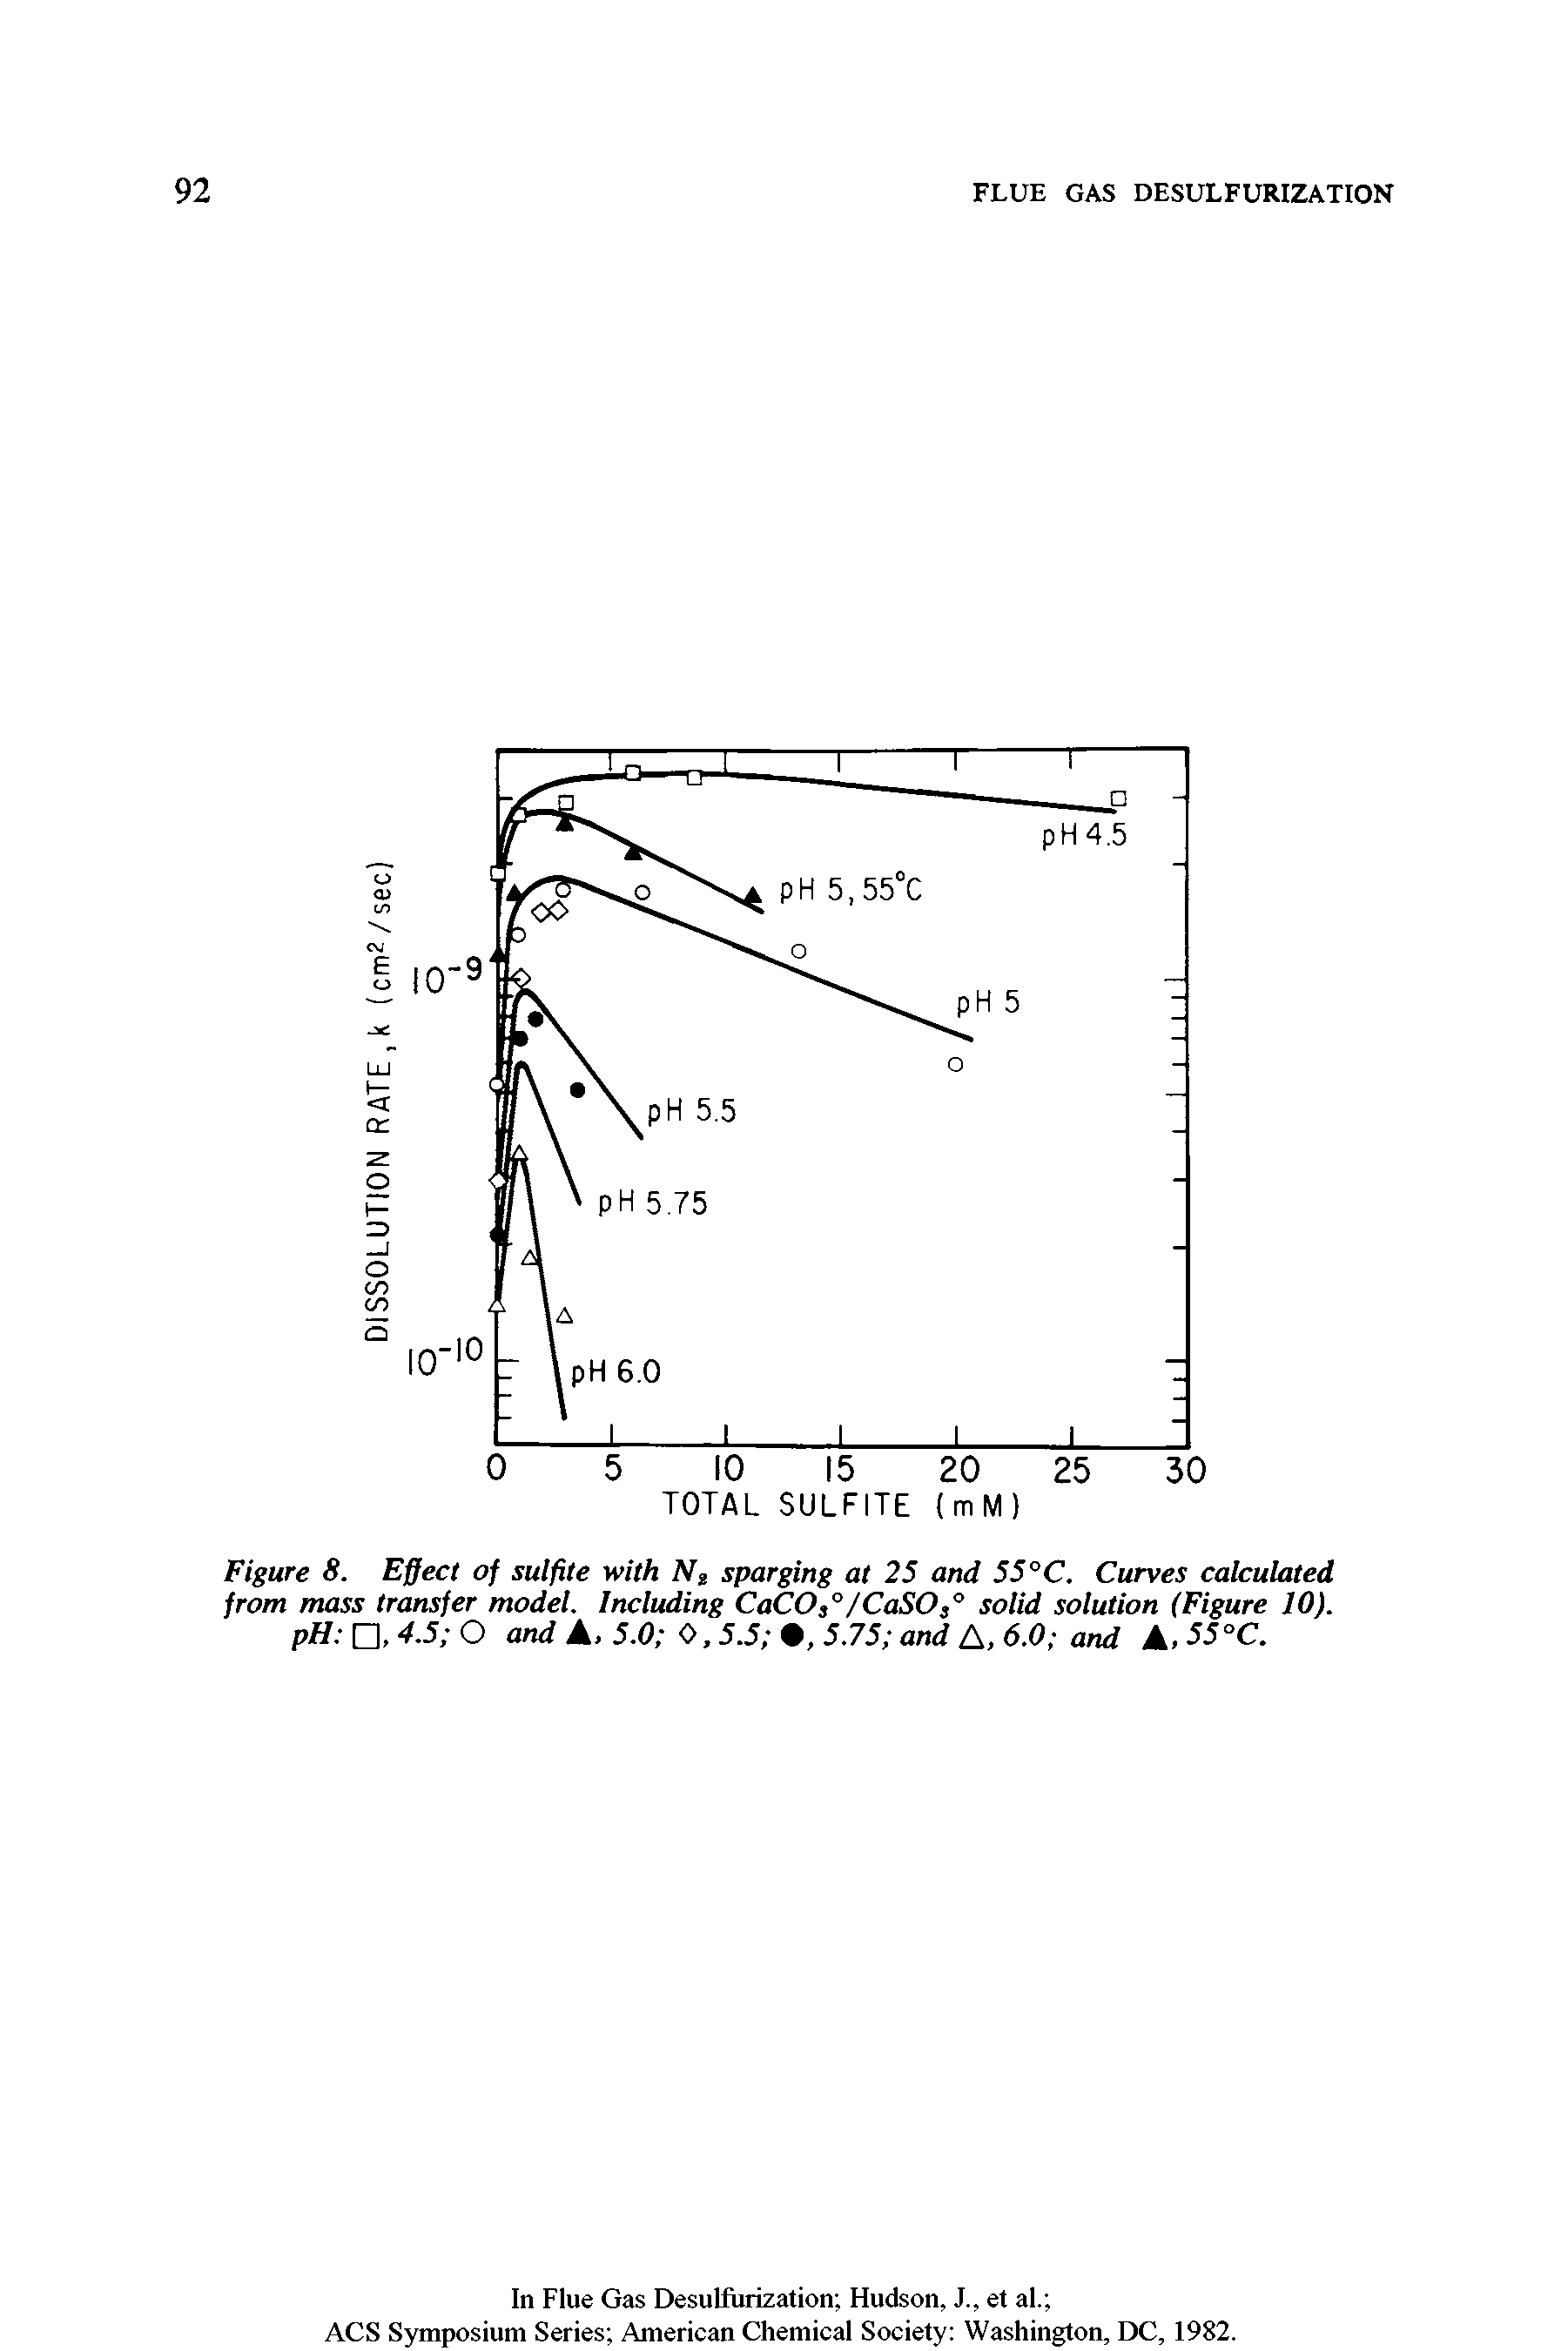 Figure 8. Effect of sulfite with N2 sparging at 25 and 55°C. Curves calculated from mass transfer model. Including CaCOs°/CaSO,° solid solution (Figure 10). pH , 4.5 O and A, 5.0 0,5.5 , 5.75 and A, 6.0 and A, S5°C.